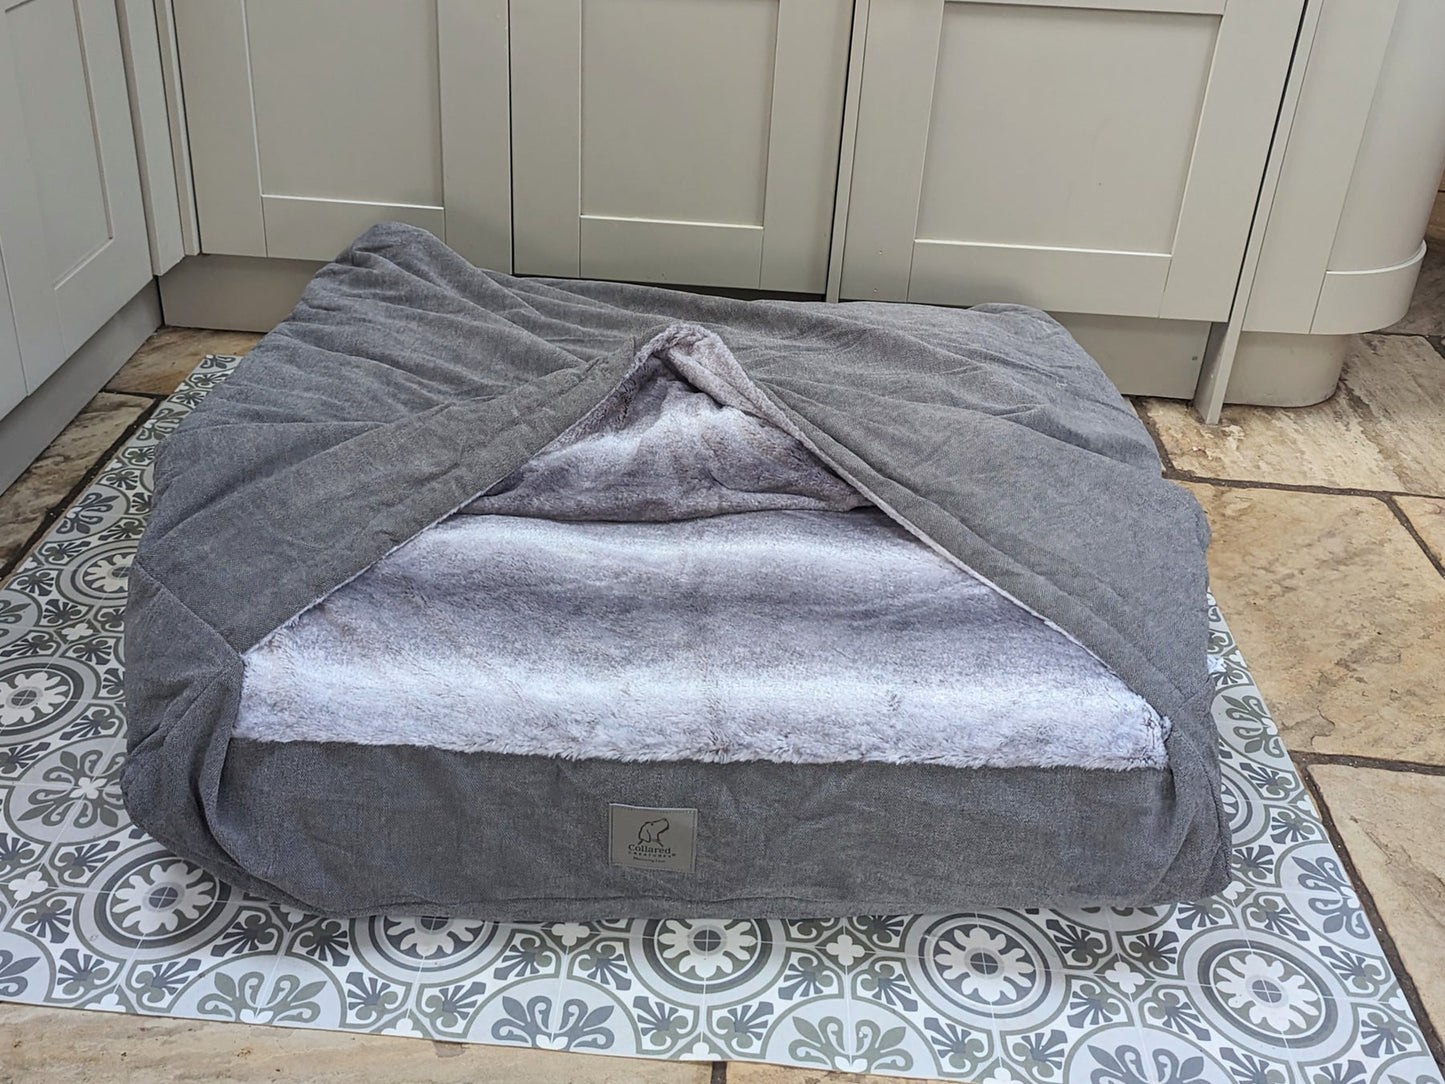 Collared Creatures Luxury Snuggle Bed / Snuggle Sack